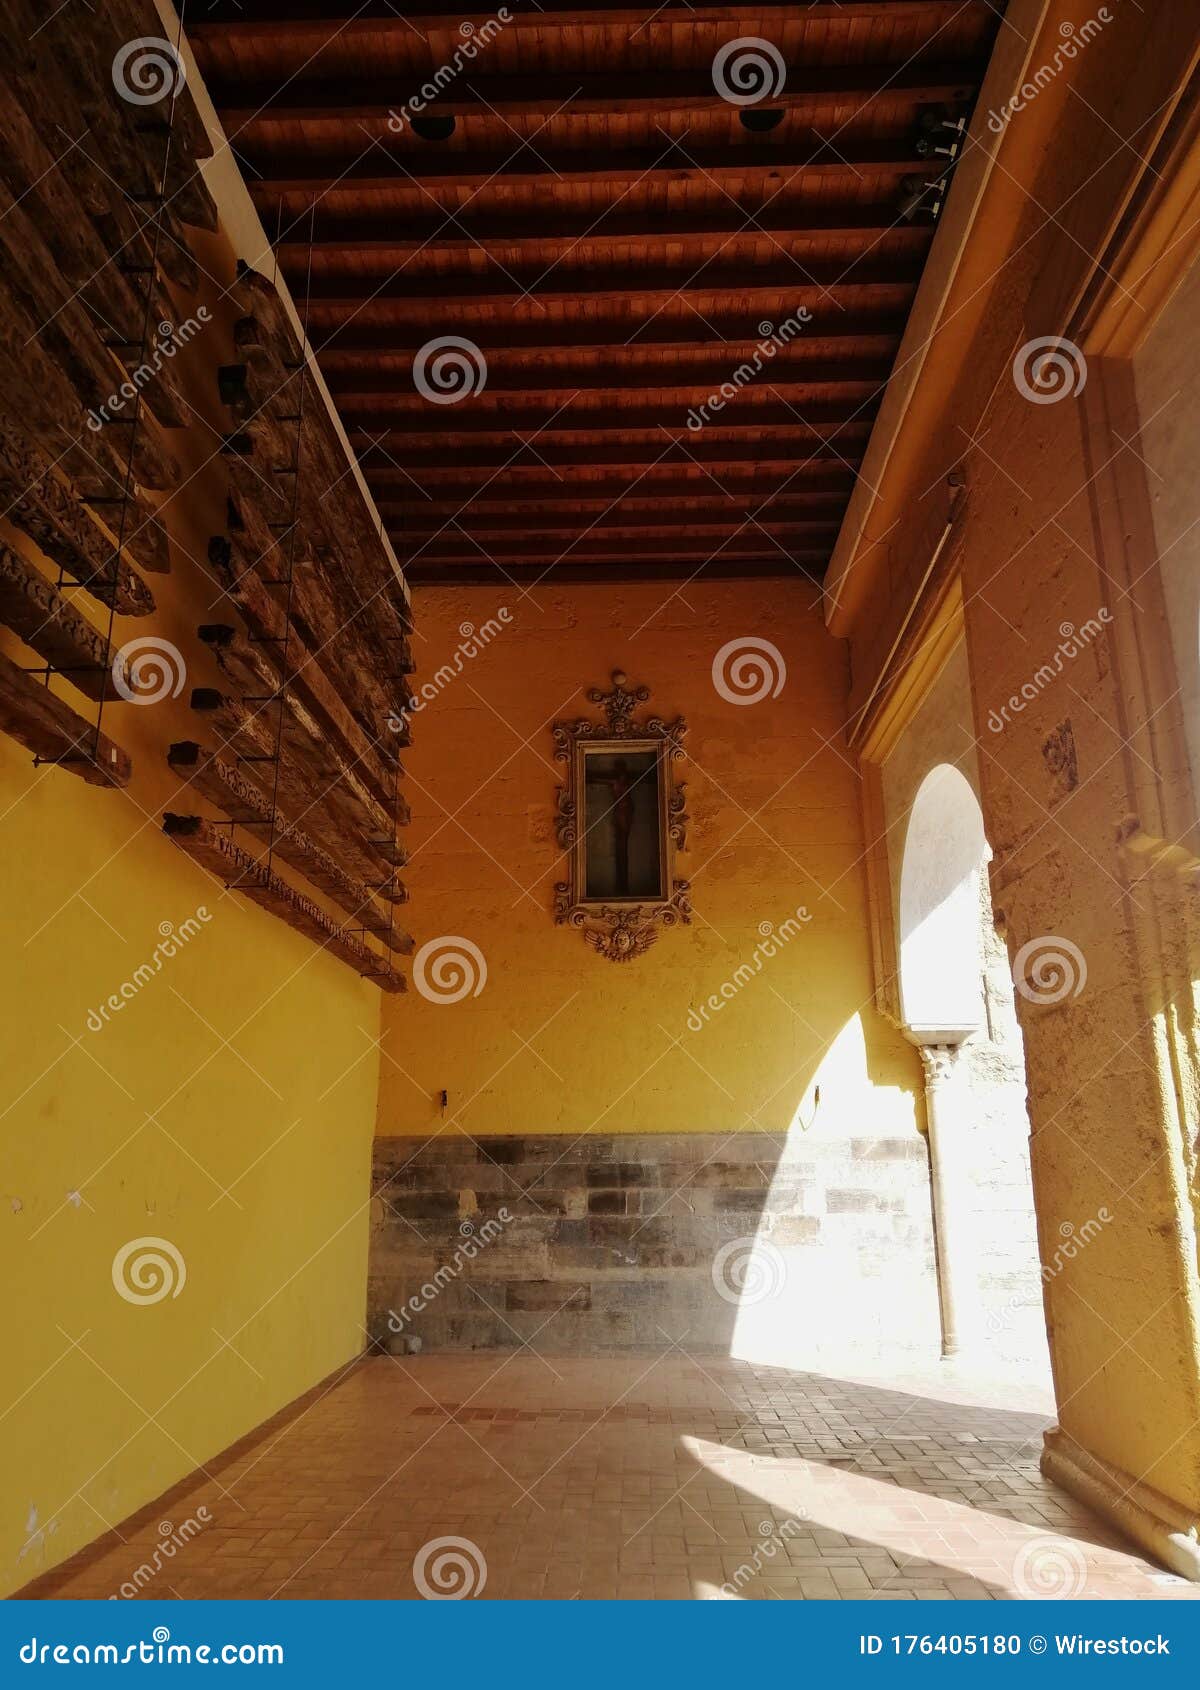 vertical shot of a cross displayed in the wall of a building in  cÃÂ³rdoba, spain